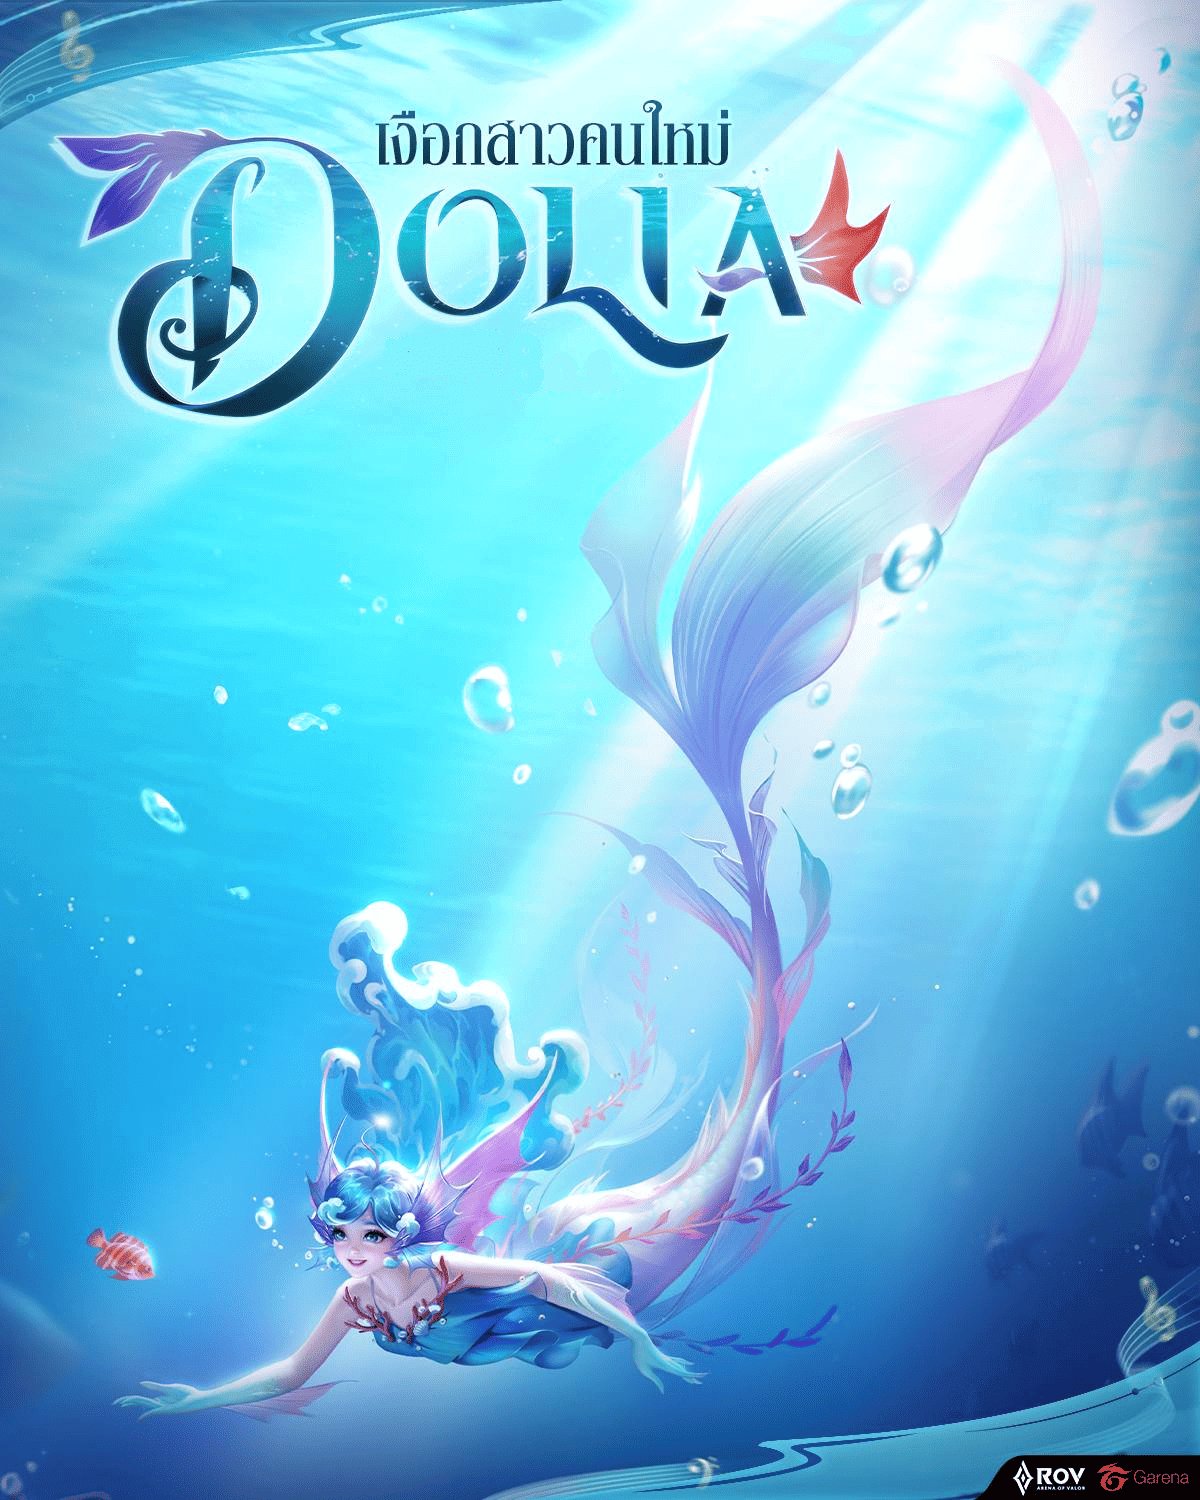 Garena RoV launches new heroine Dolia, with activities to receive free heroes and items!